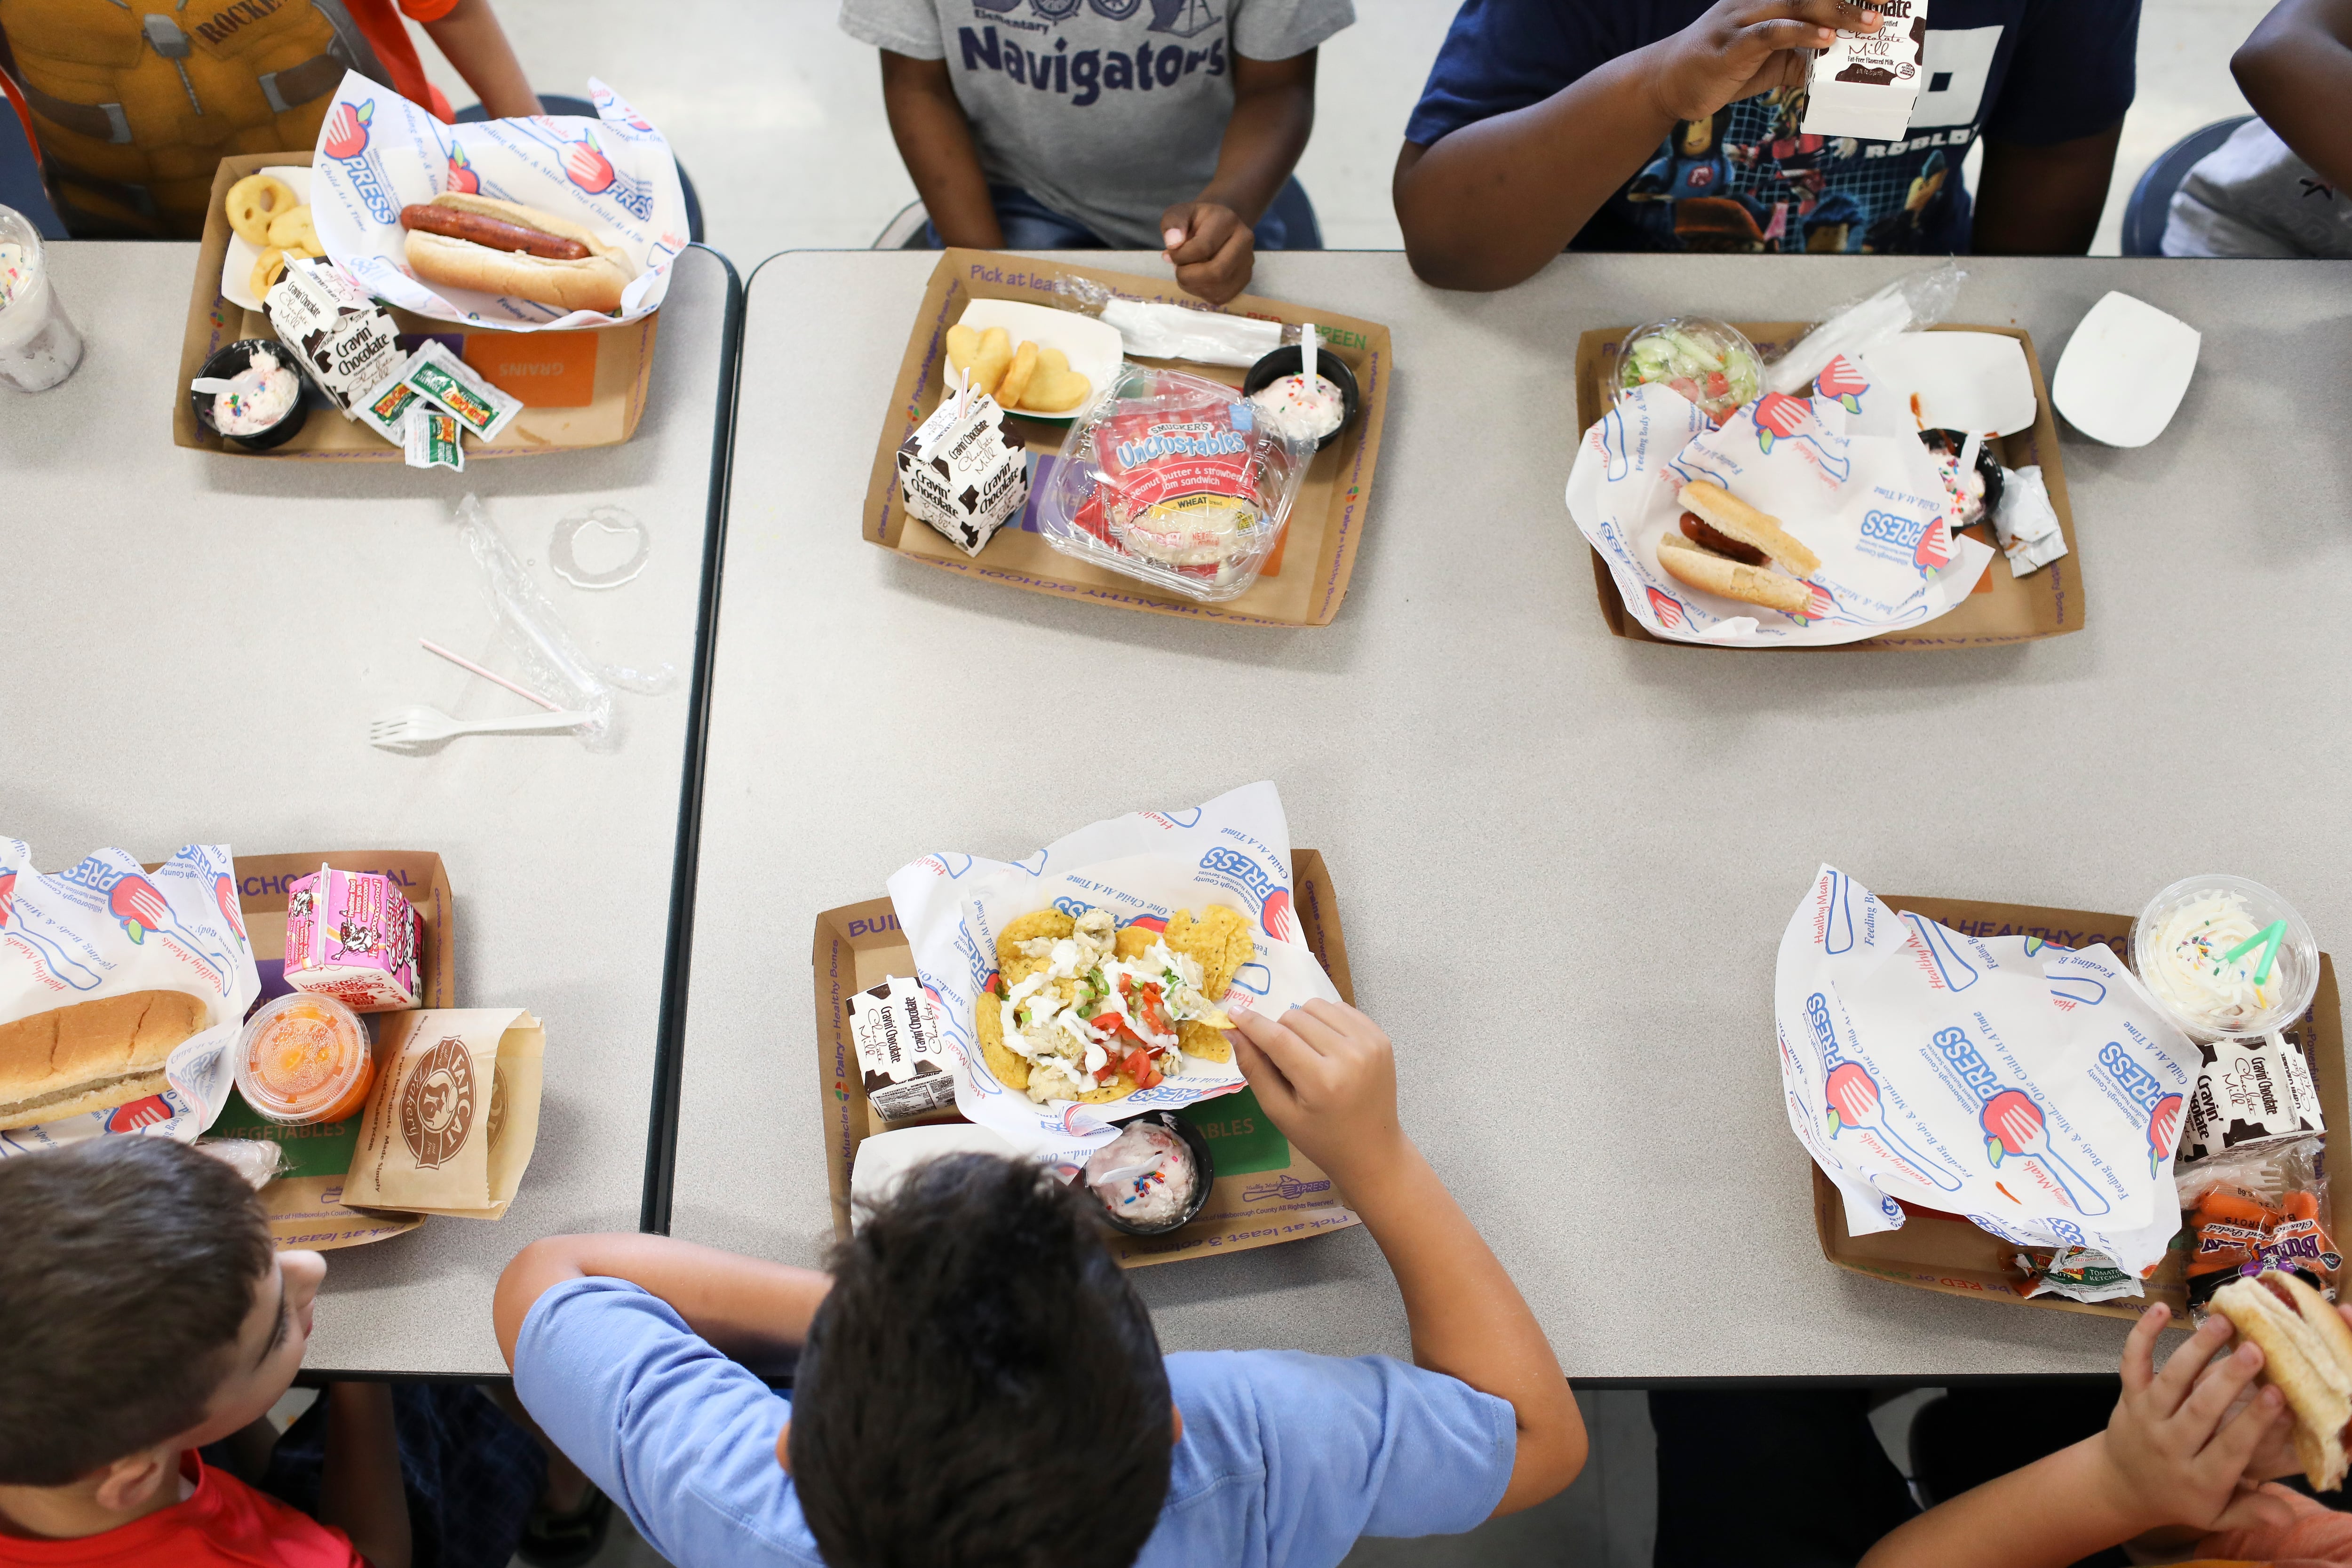 A group of children eat their school lunches at a table in the cafeteria.